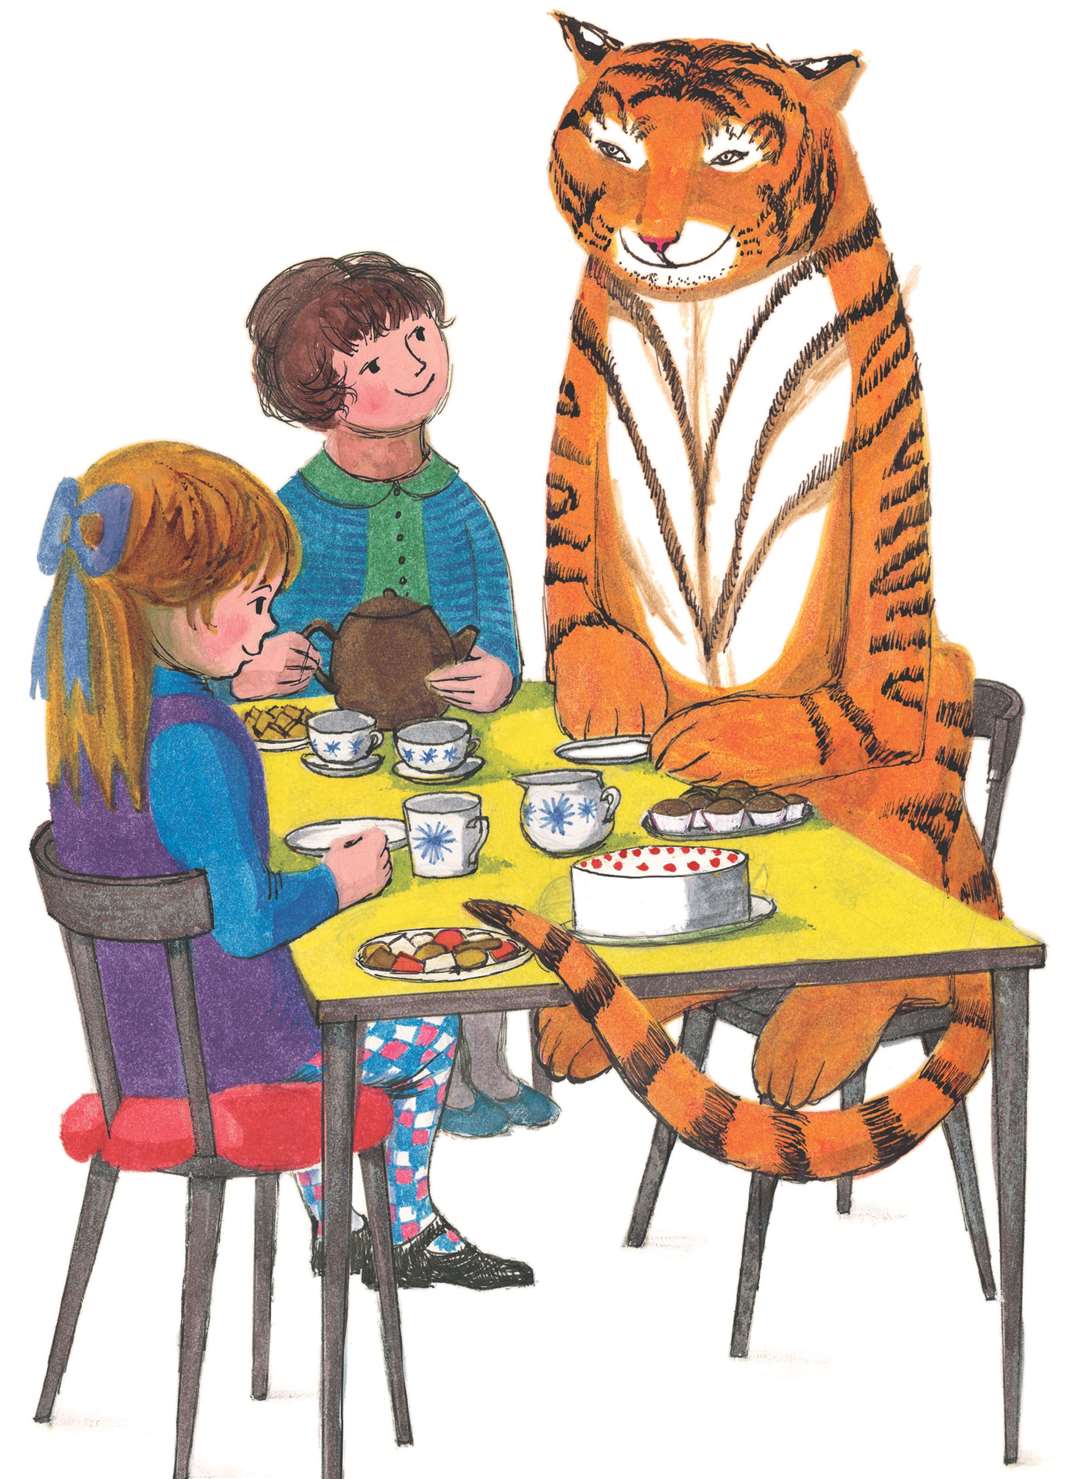 It is more than 50 years since Judith Kerr wrote The Tiger Who Came to Tea Picture: HarperCollins